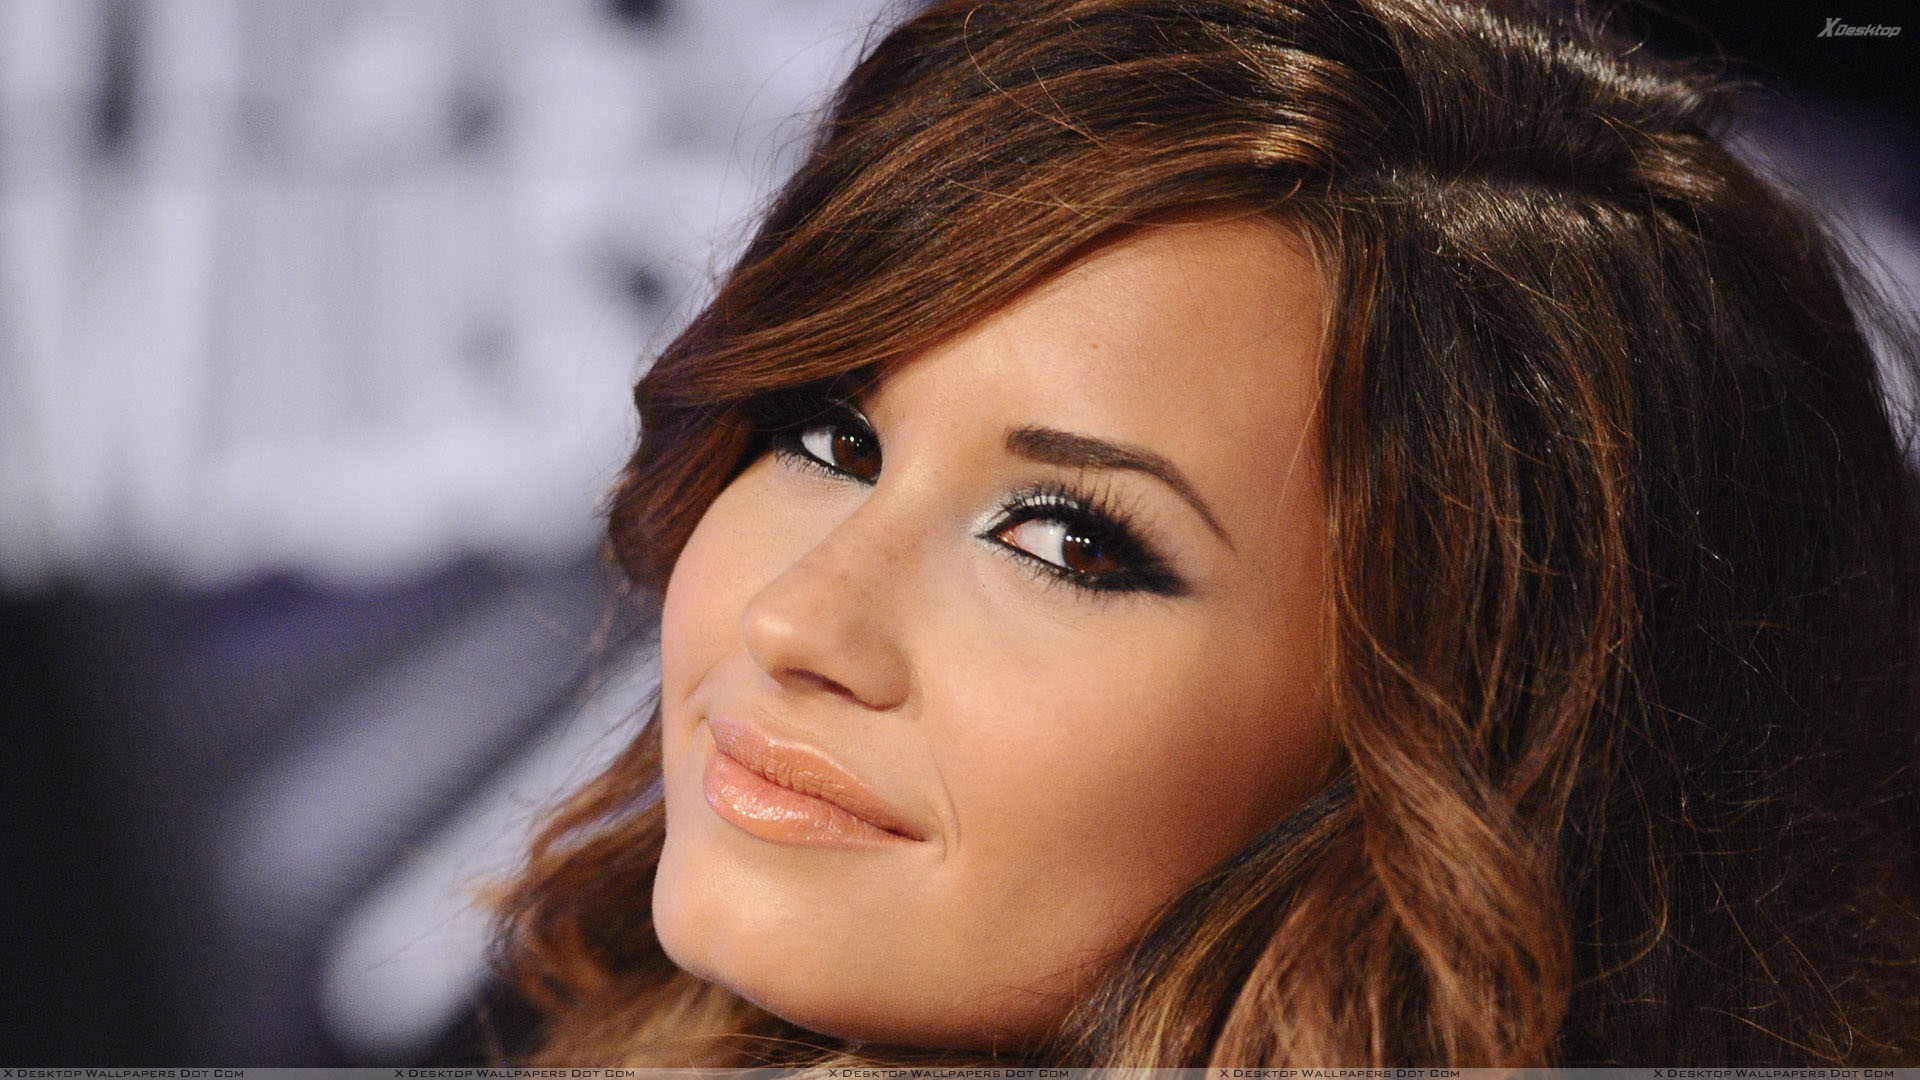 1920x1080 You are viewing wallpaper titled "Demi Lovato Looking Back Face Closeup ...